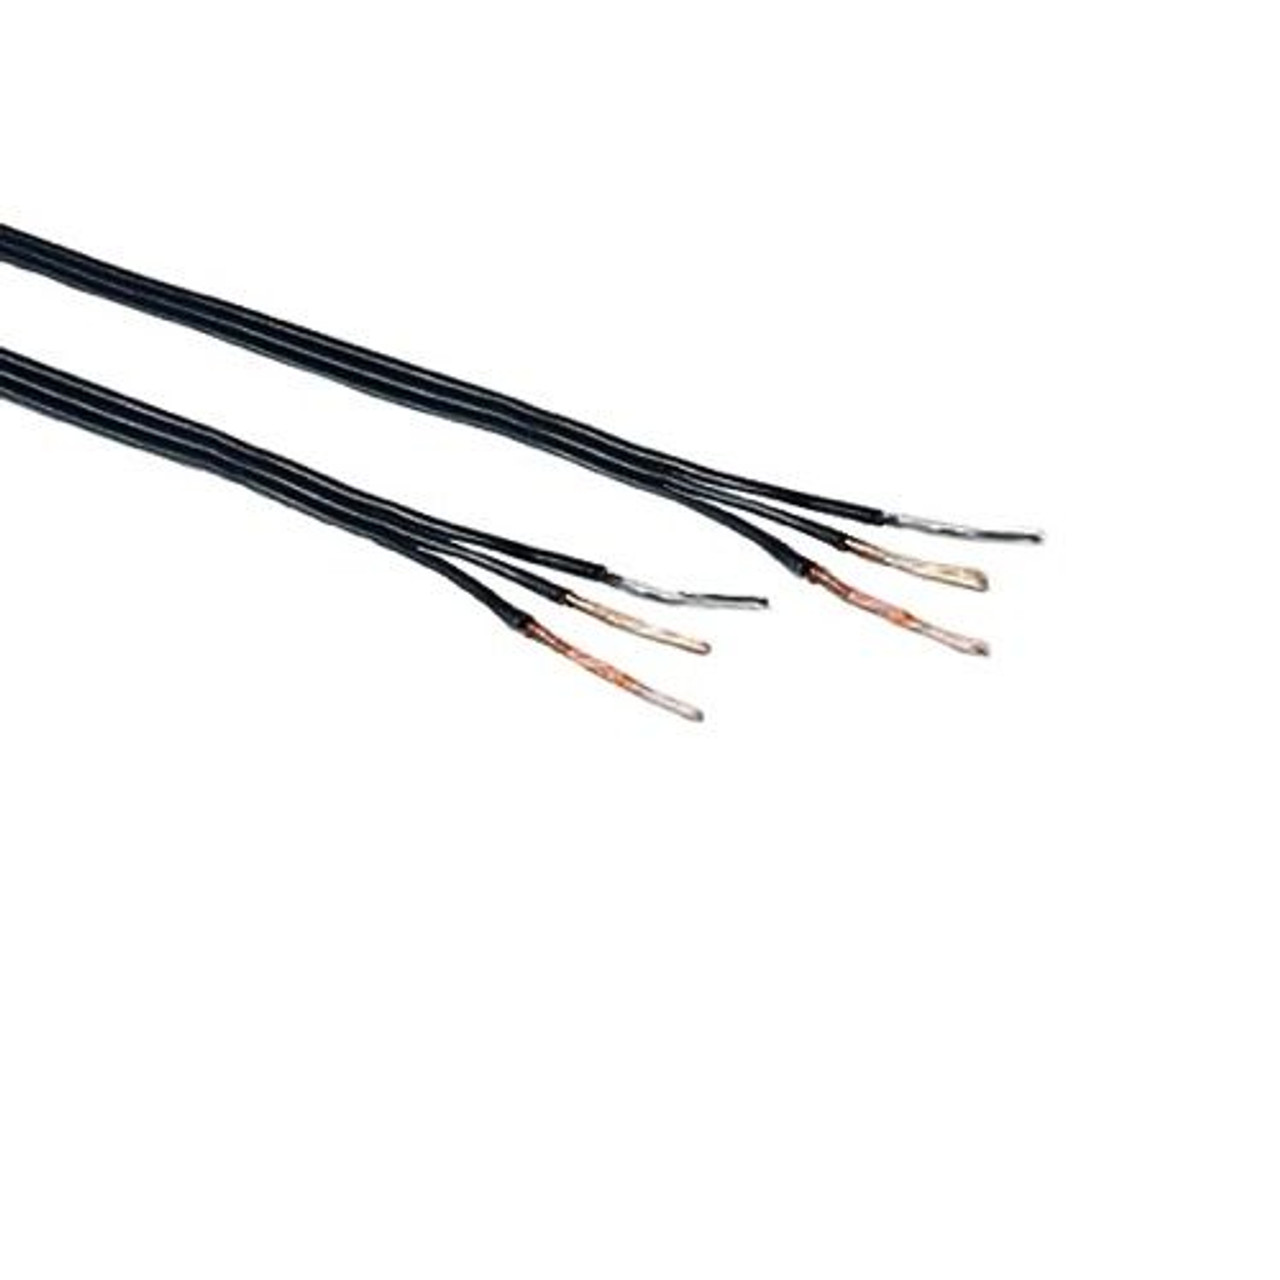 Antenna Rotor 3 Wire Cable 75' FT Automatic Rotator 3 Conductor Rotor Wire PH61422 Outdoor Aerial Signal Finder Locator Connector Controller Cable, Part # PH-61422